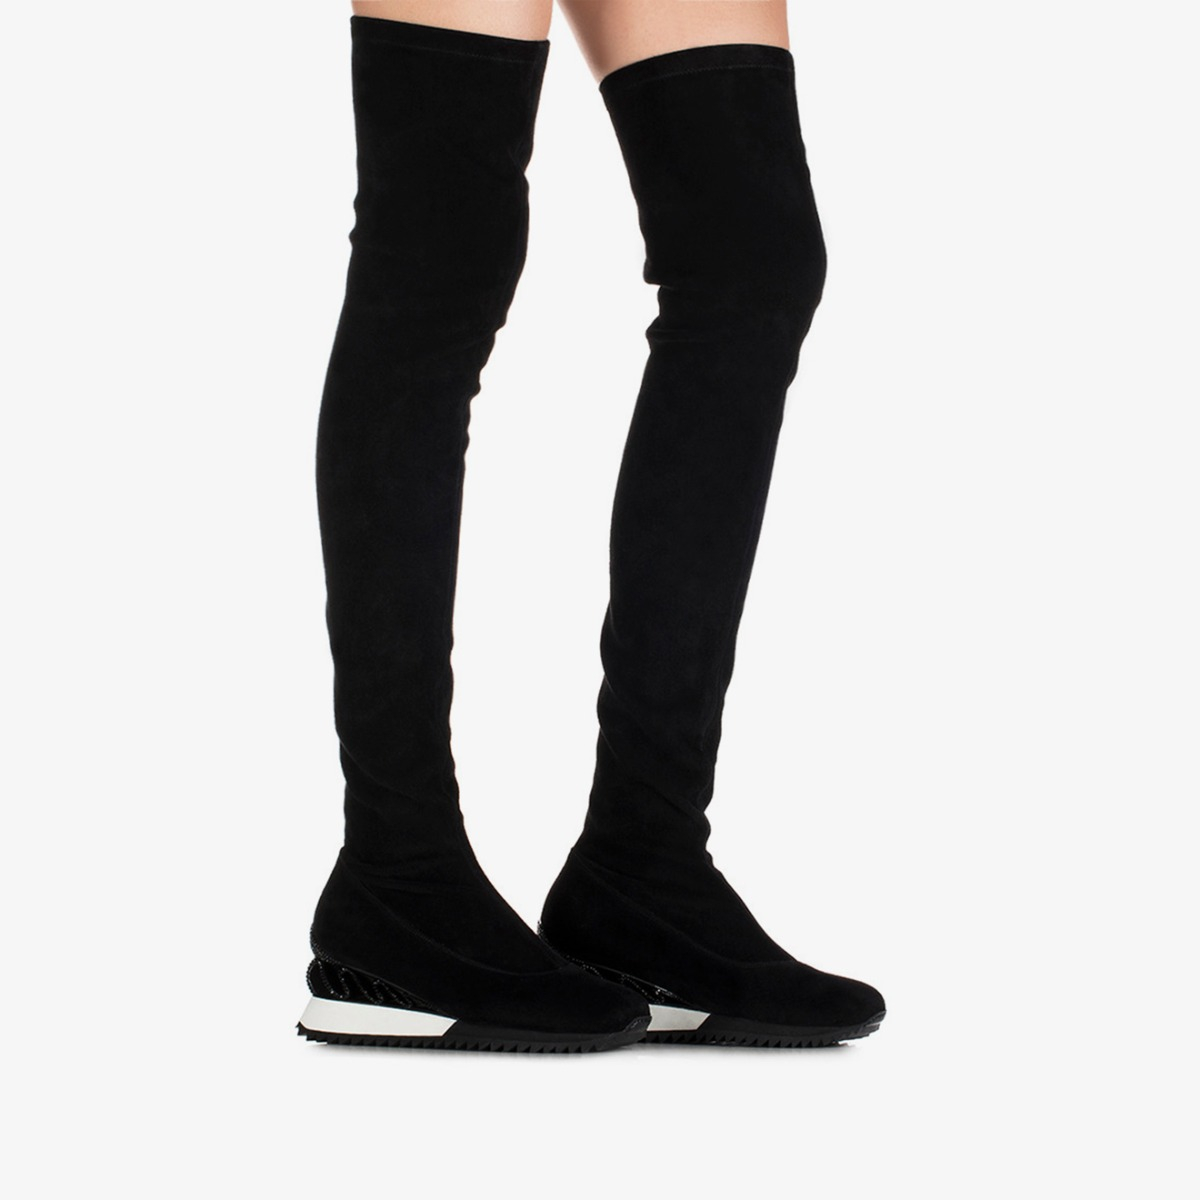 REIKO THIGH-HIGH BOOT 60 mm - Le Silla official outlet